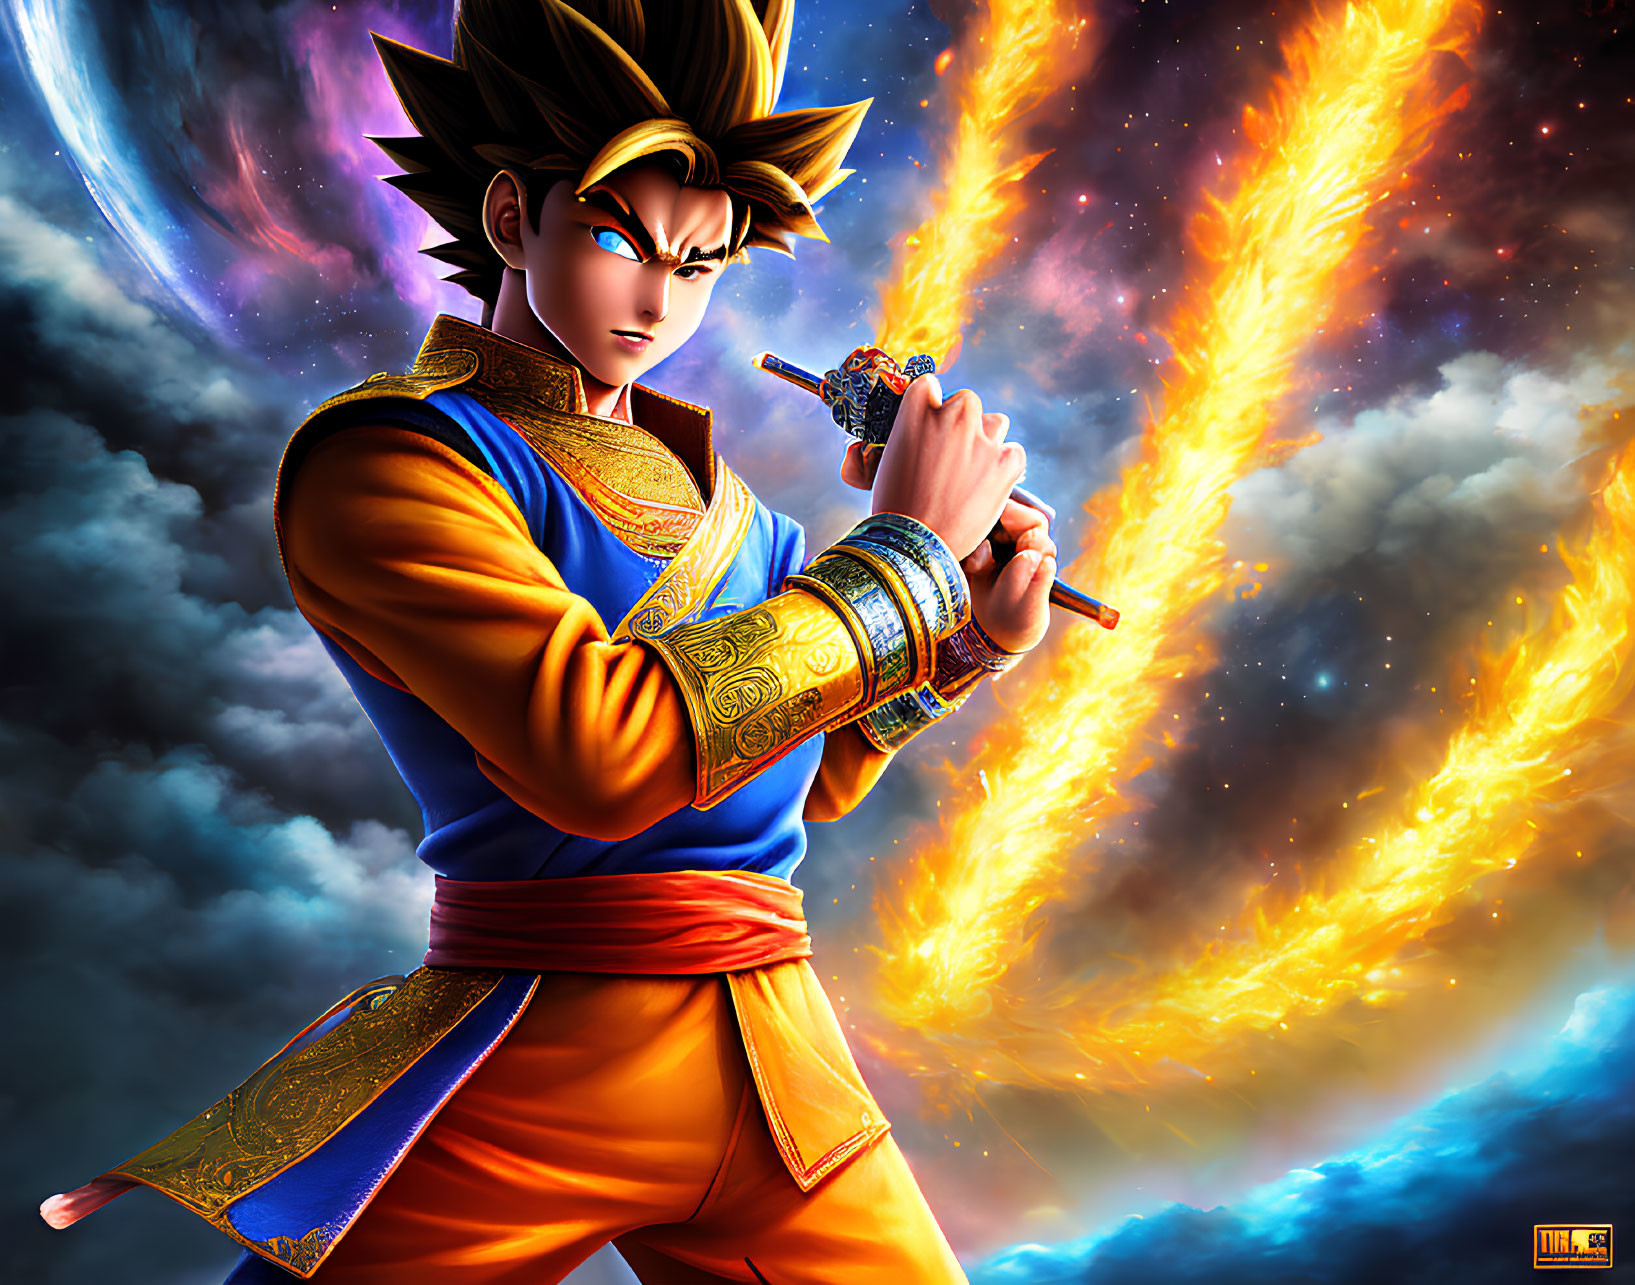 Spiky-haired animated character in blue and gold outfit with staff against cosmic backdrop.